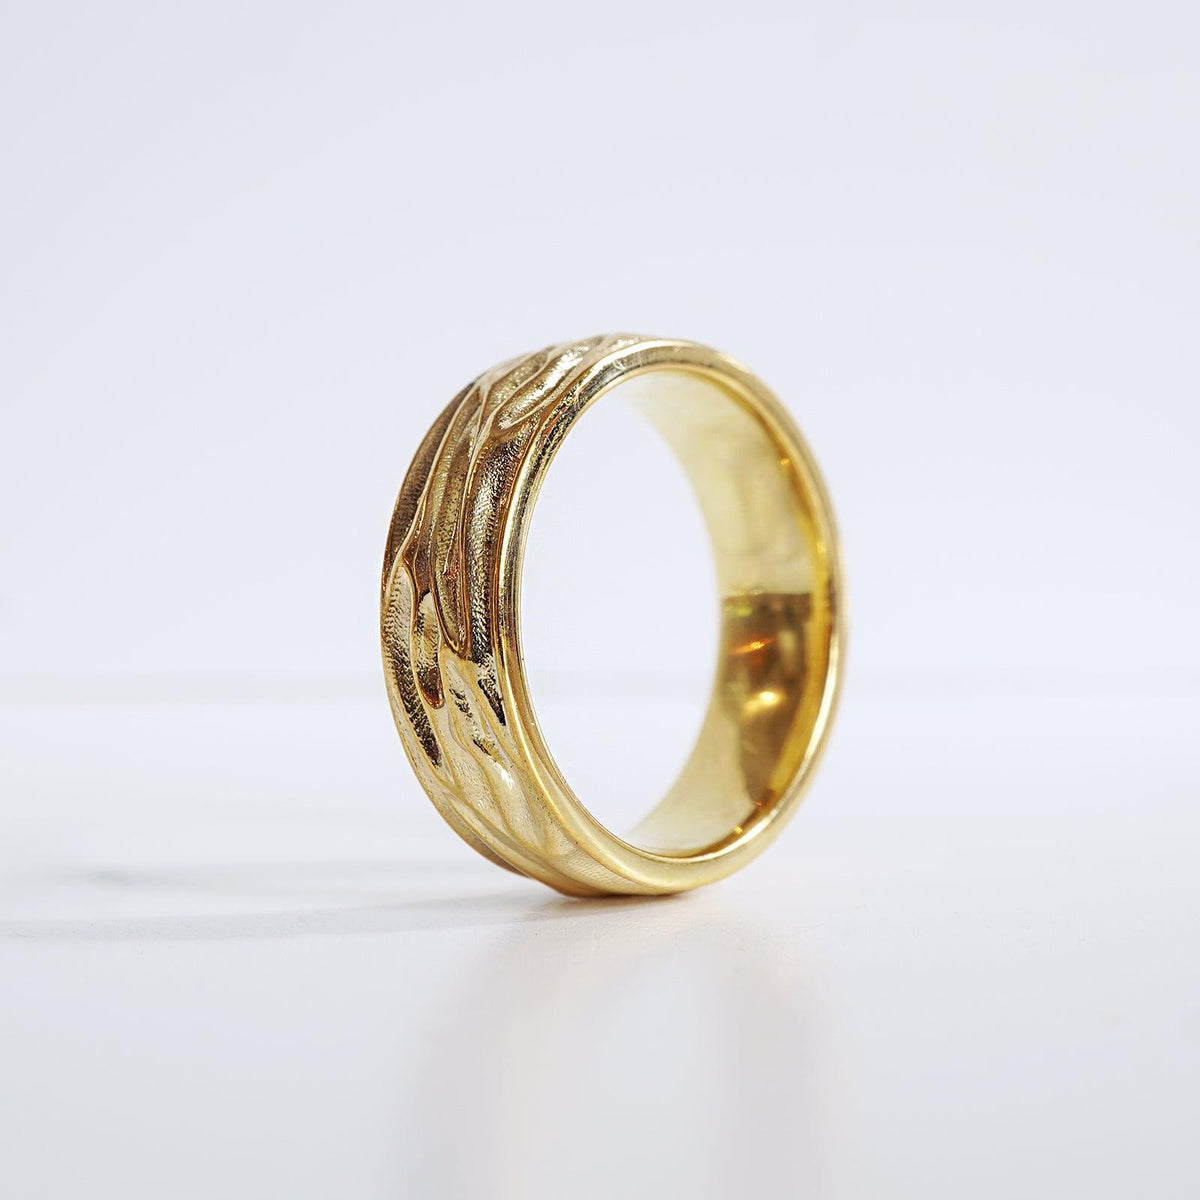 Liquid Ring Band in Sterling Silver and 14K Gold, 7mm - Tippy Taste Jewelry